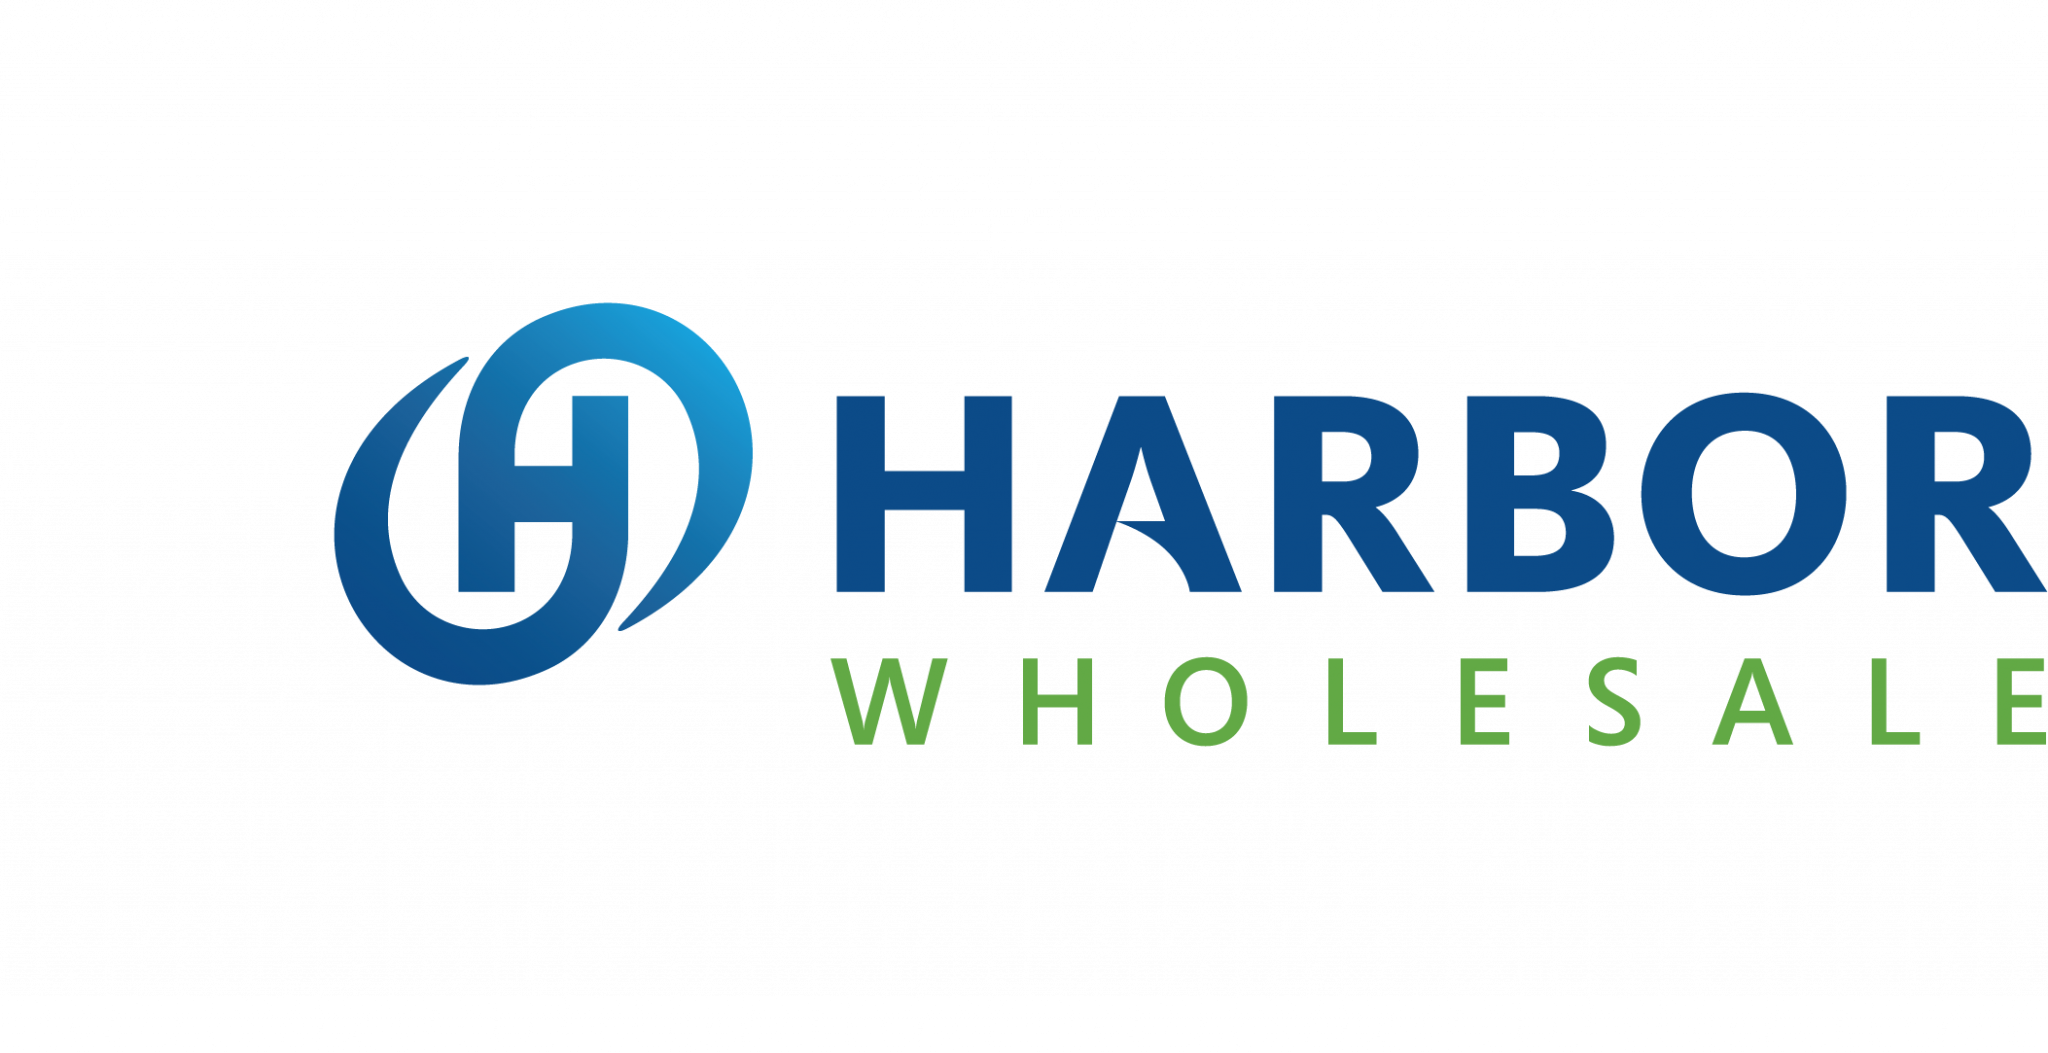 Harbor Wholesale and Rich and Rhine Wholesale Enter into Agreement to